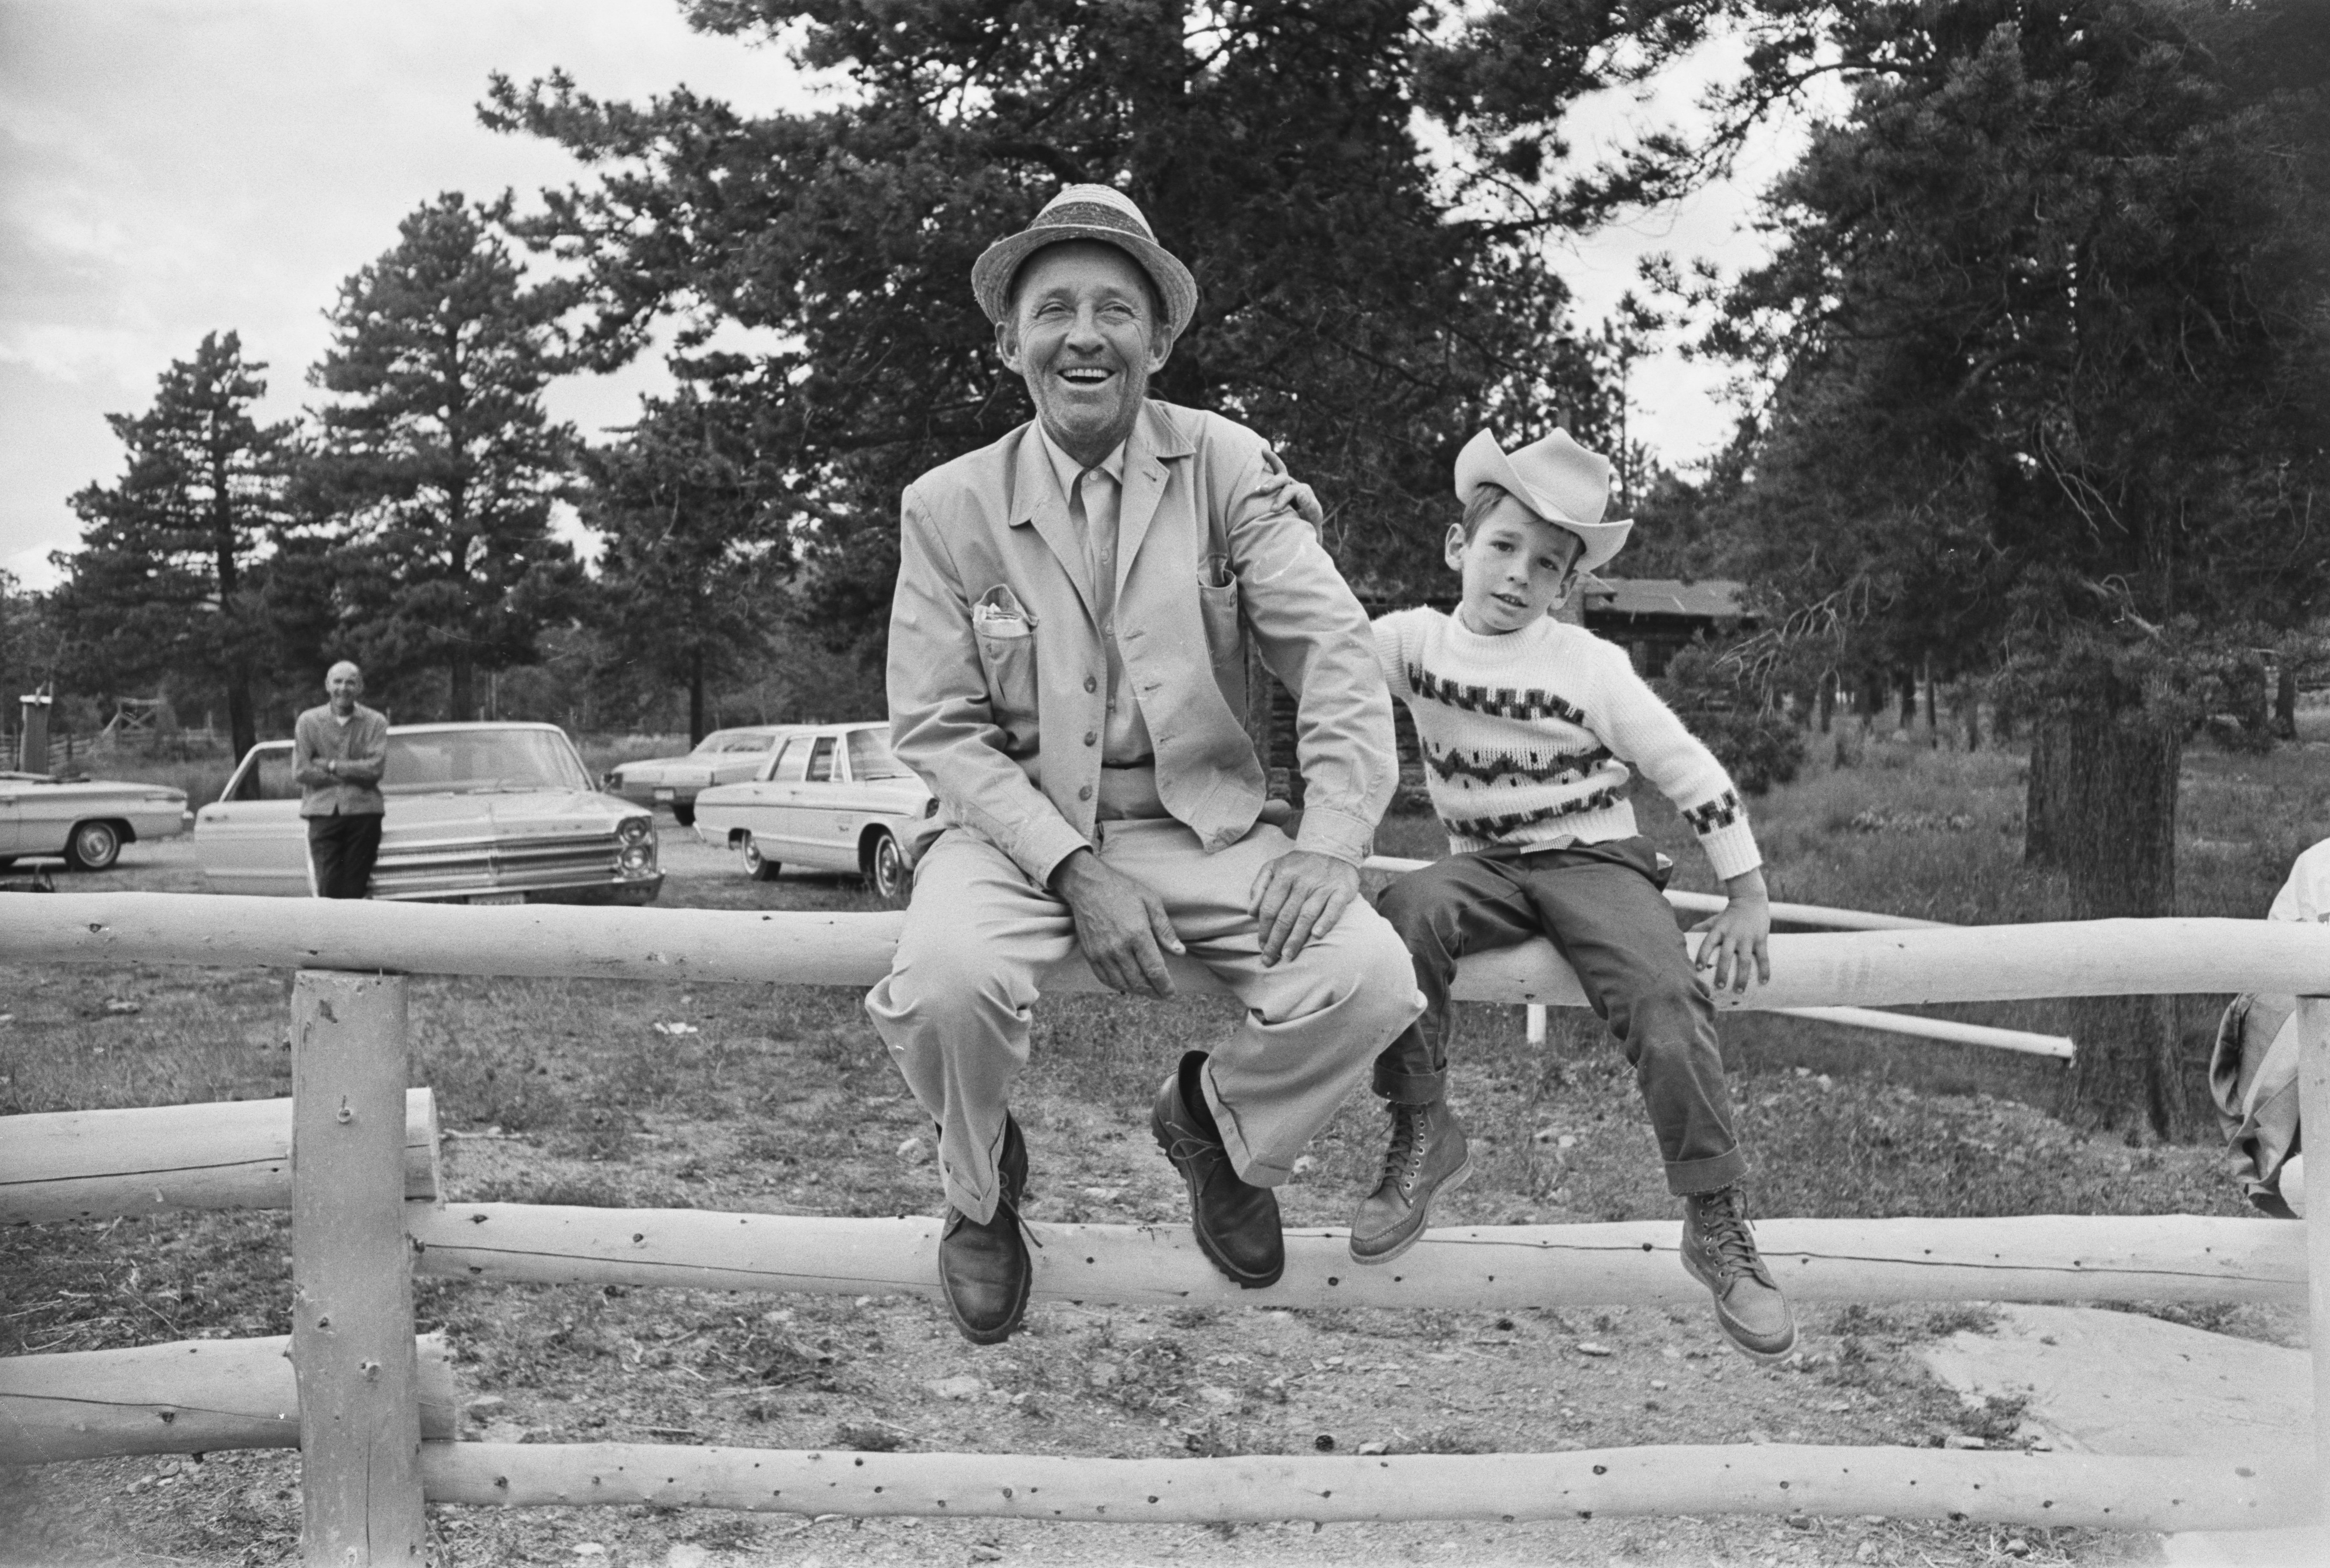 American singer and actor Bing Crosby (1903-1977) with his son Harry Crosby, wearing hats and smiling as they sit on a wooden fence, 1965. | Source: Getty Images